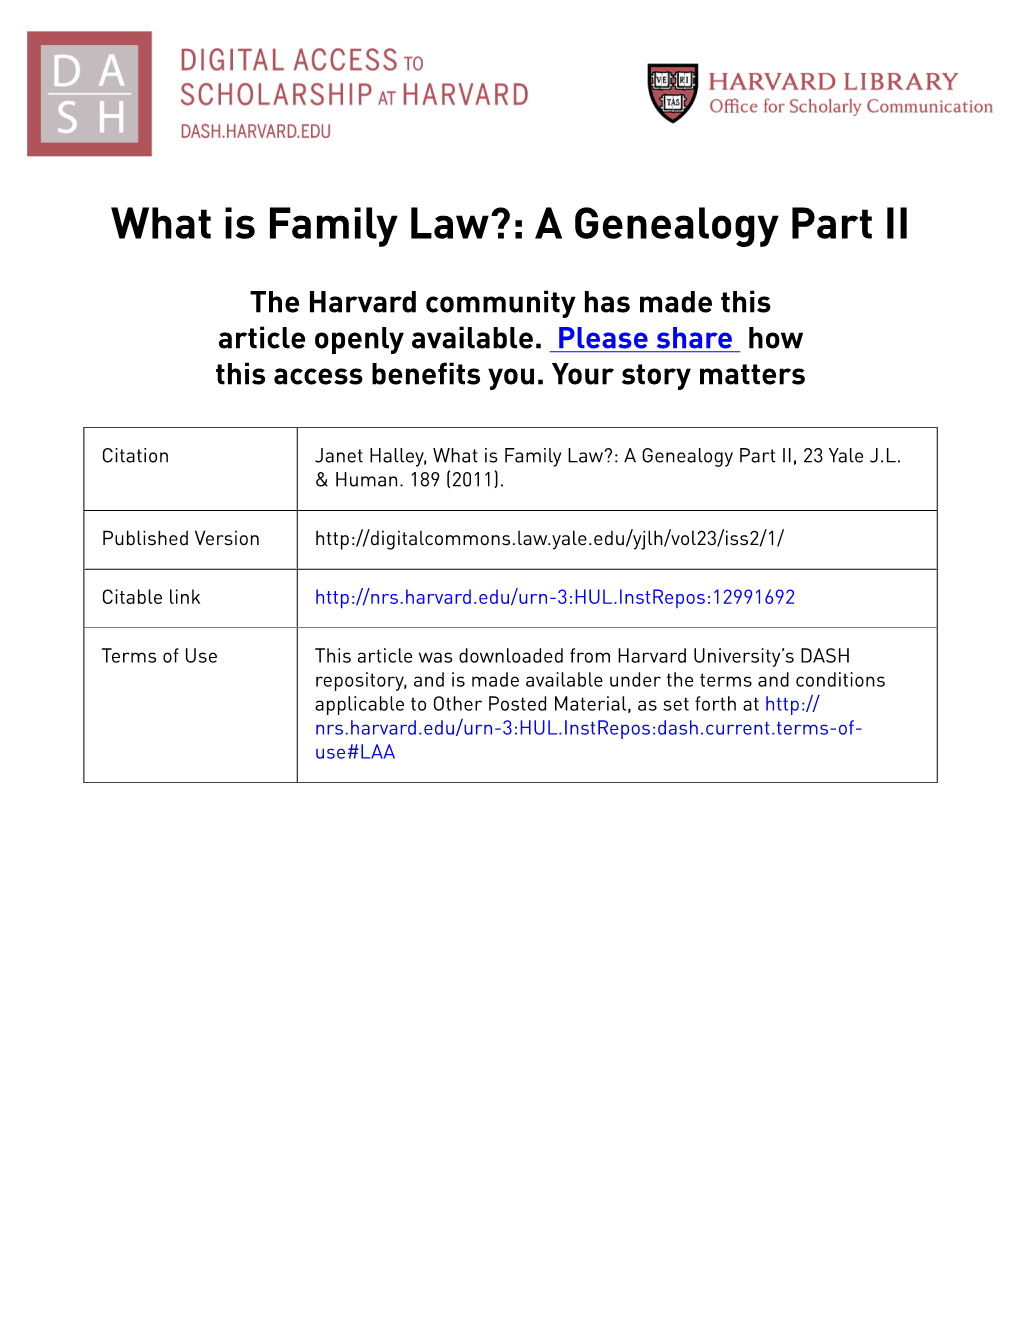 What Is Family Law?: a Genealogy Part II